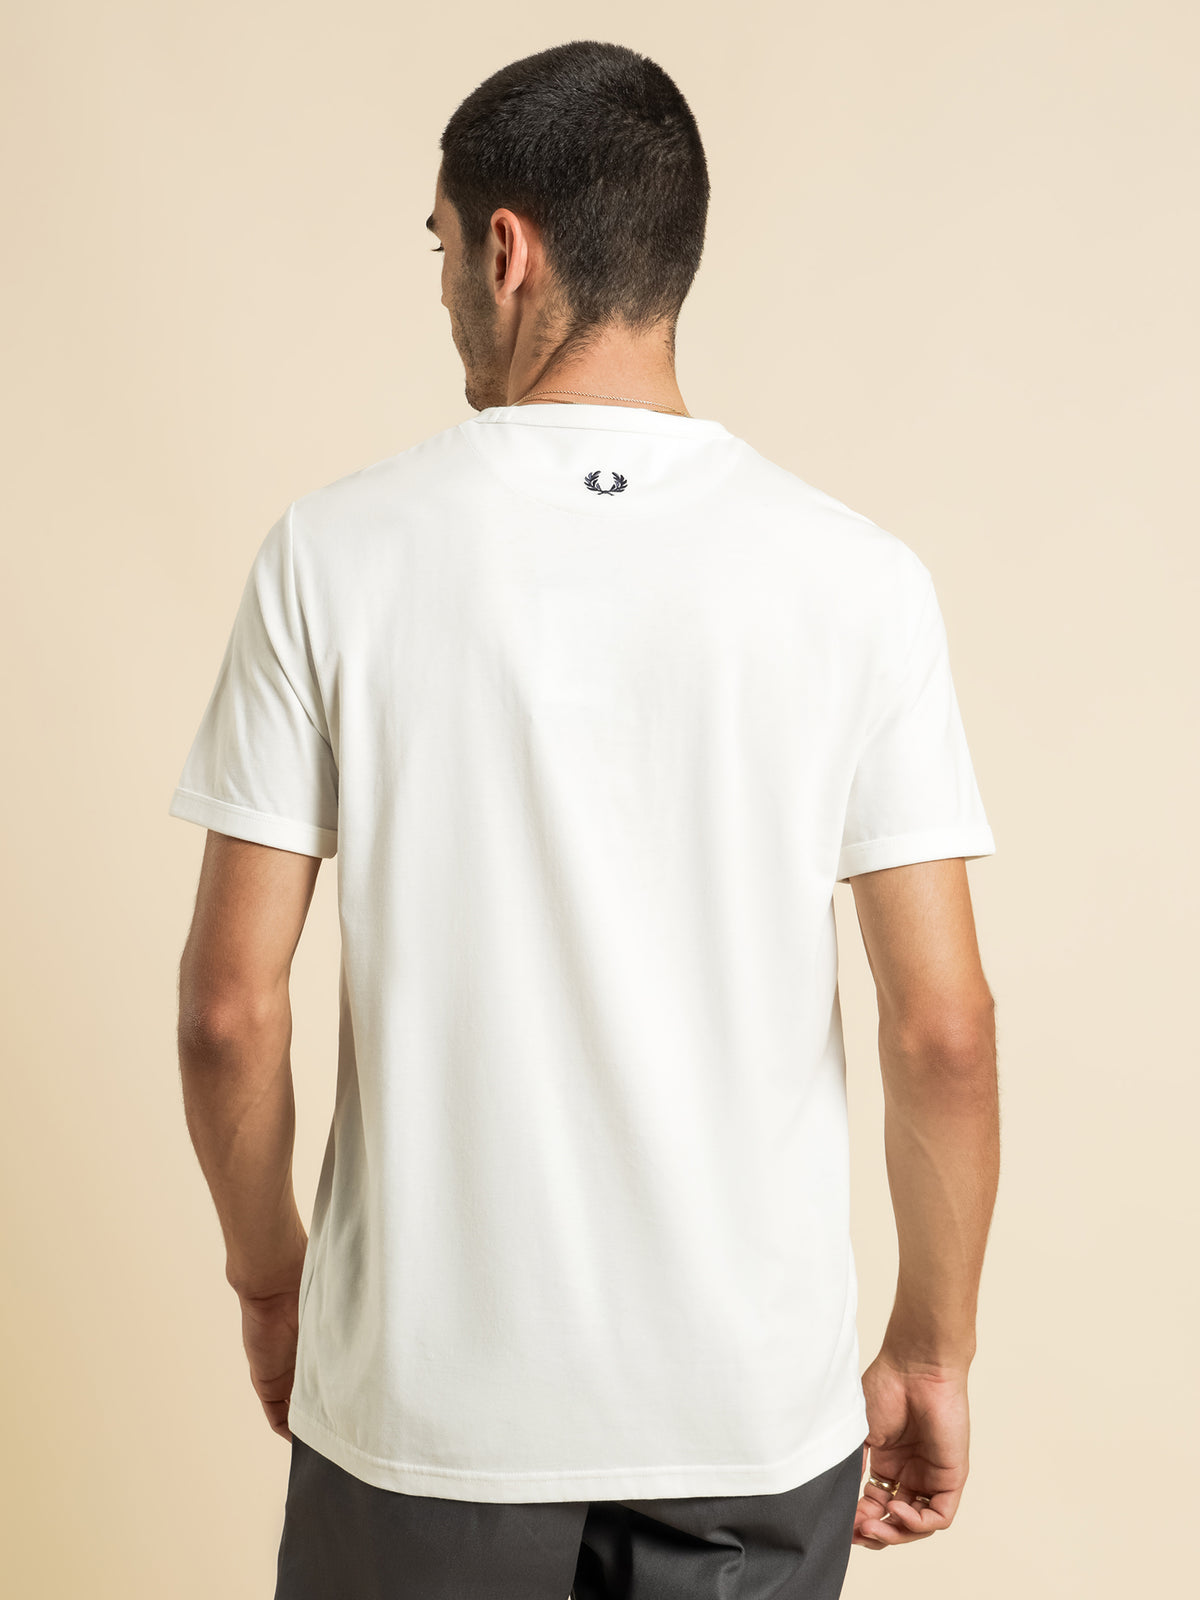 Arch Branded T-Shirt in White